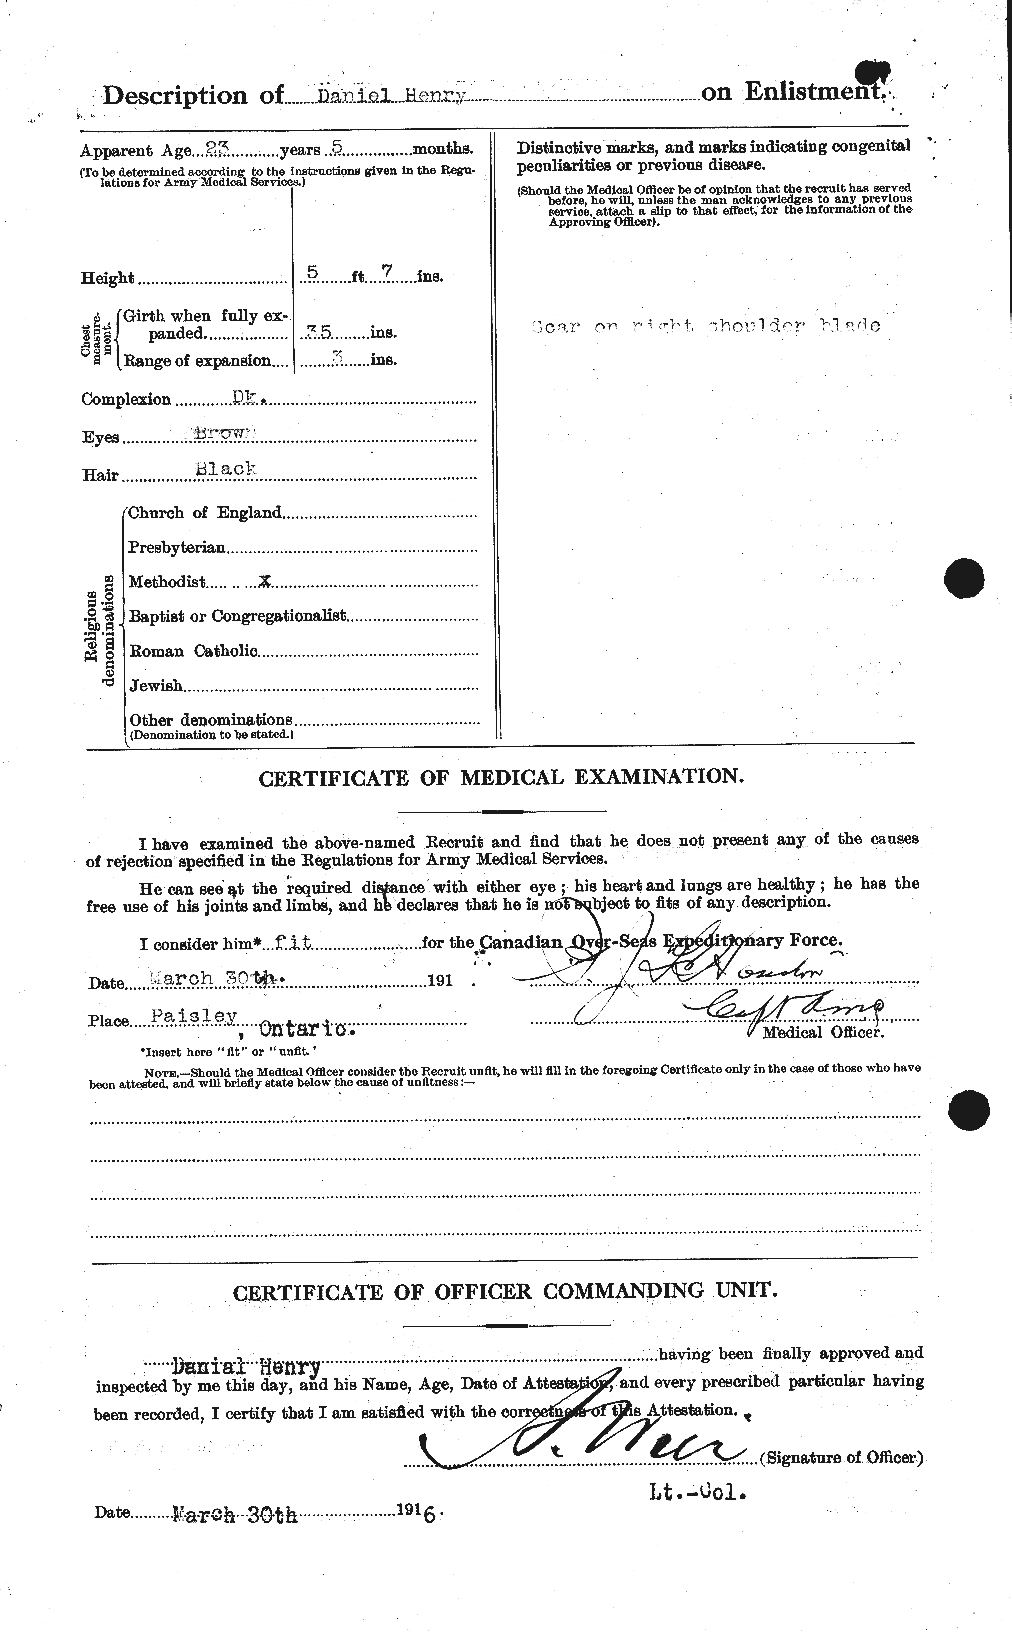 Personnel Records of the First World War - CEF 392819b